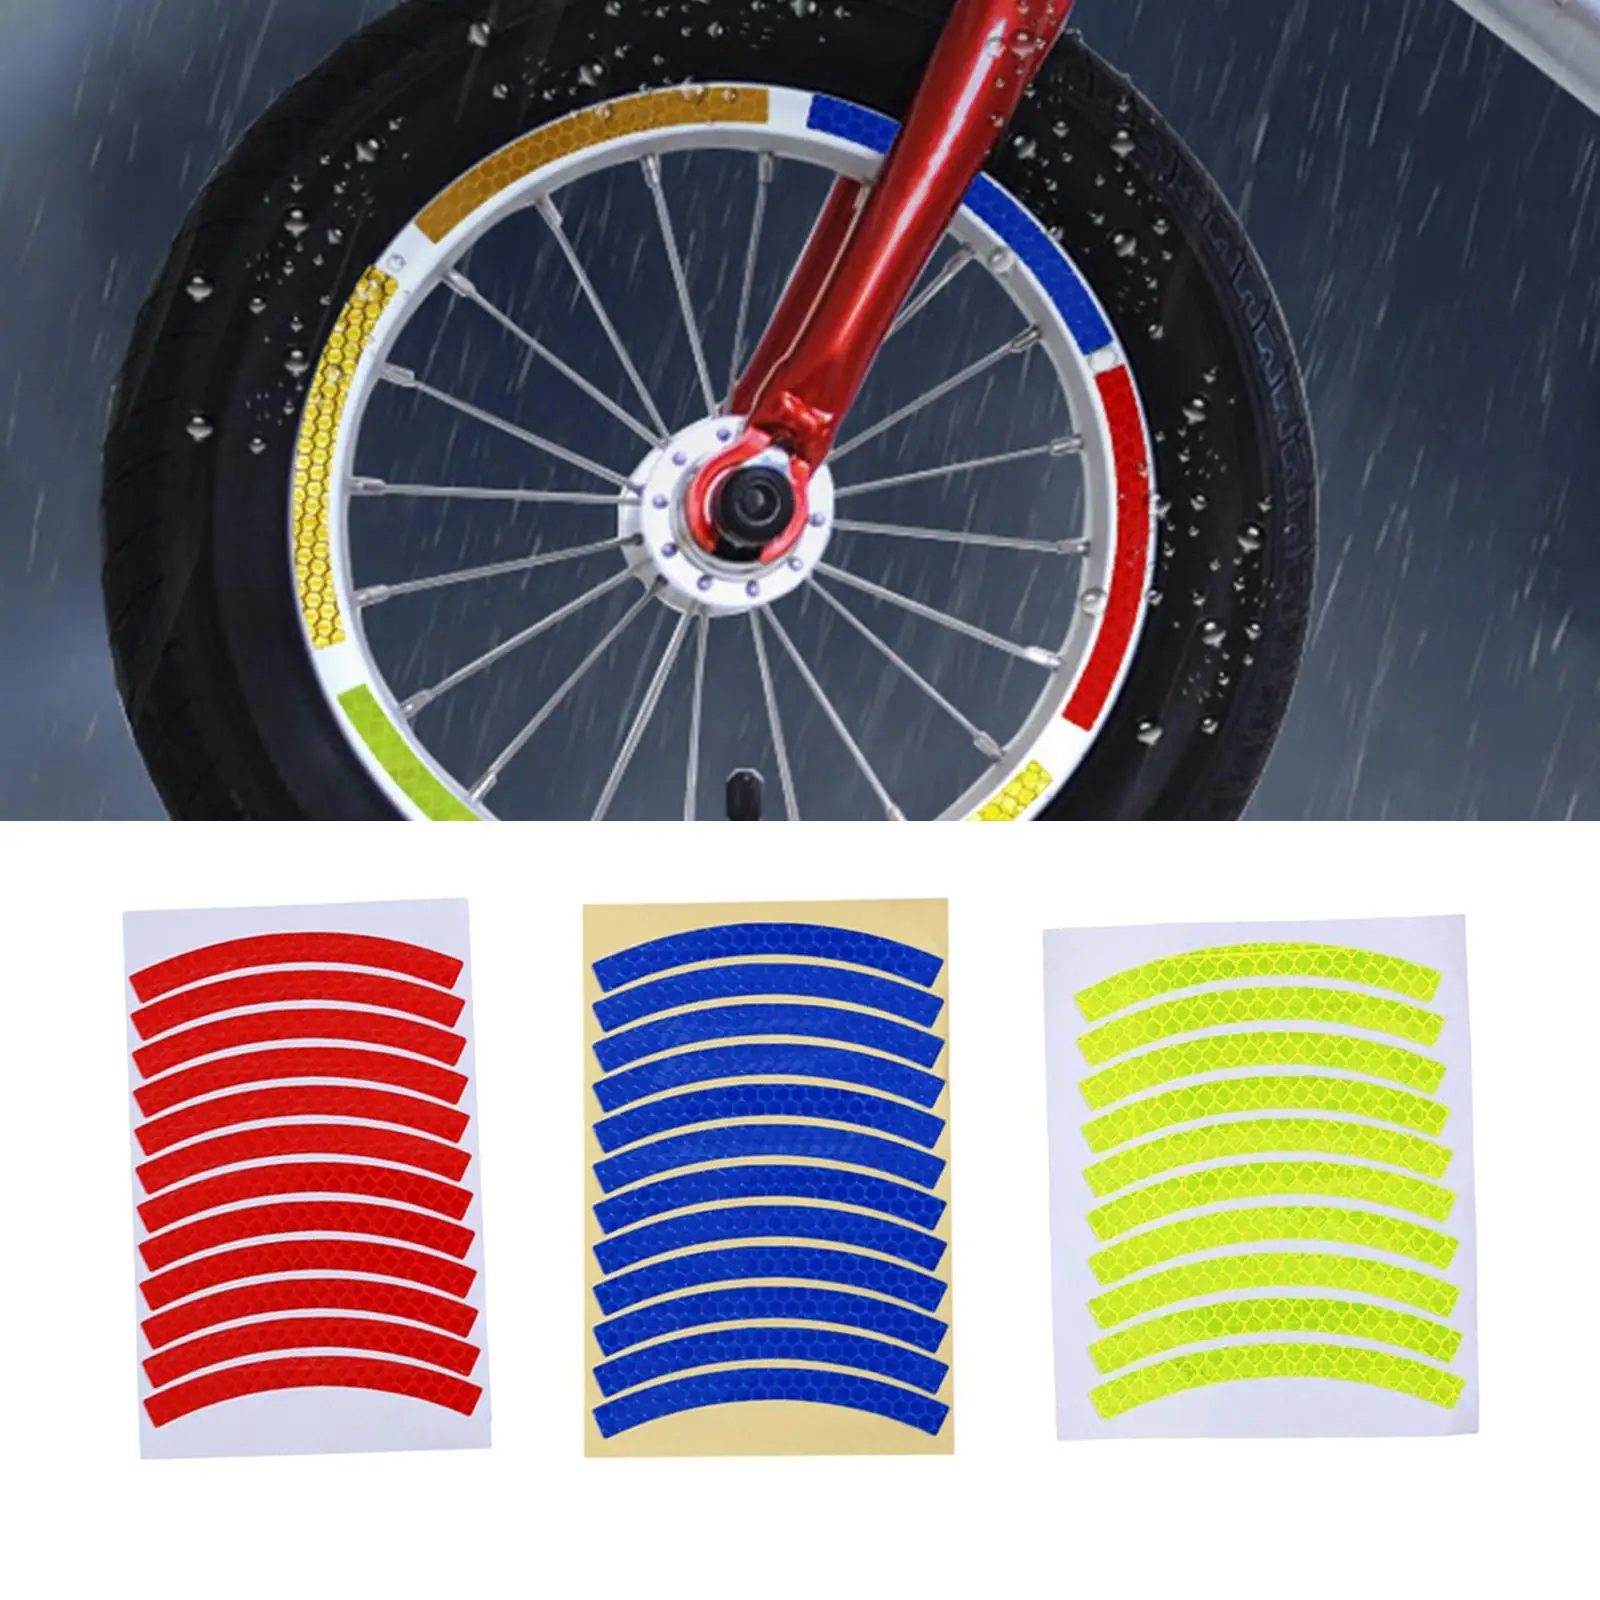 Reflective Stickers Tire Applique Safety Warning Stickers for Kids Balance Bicycle